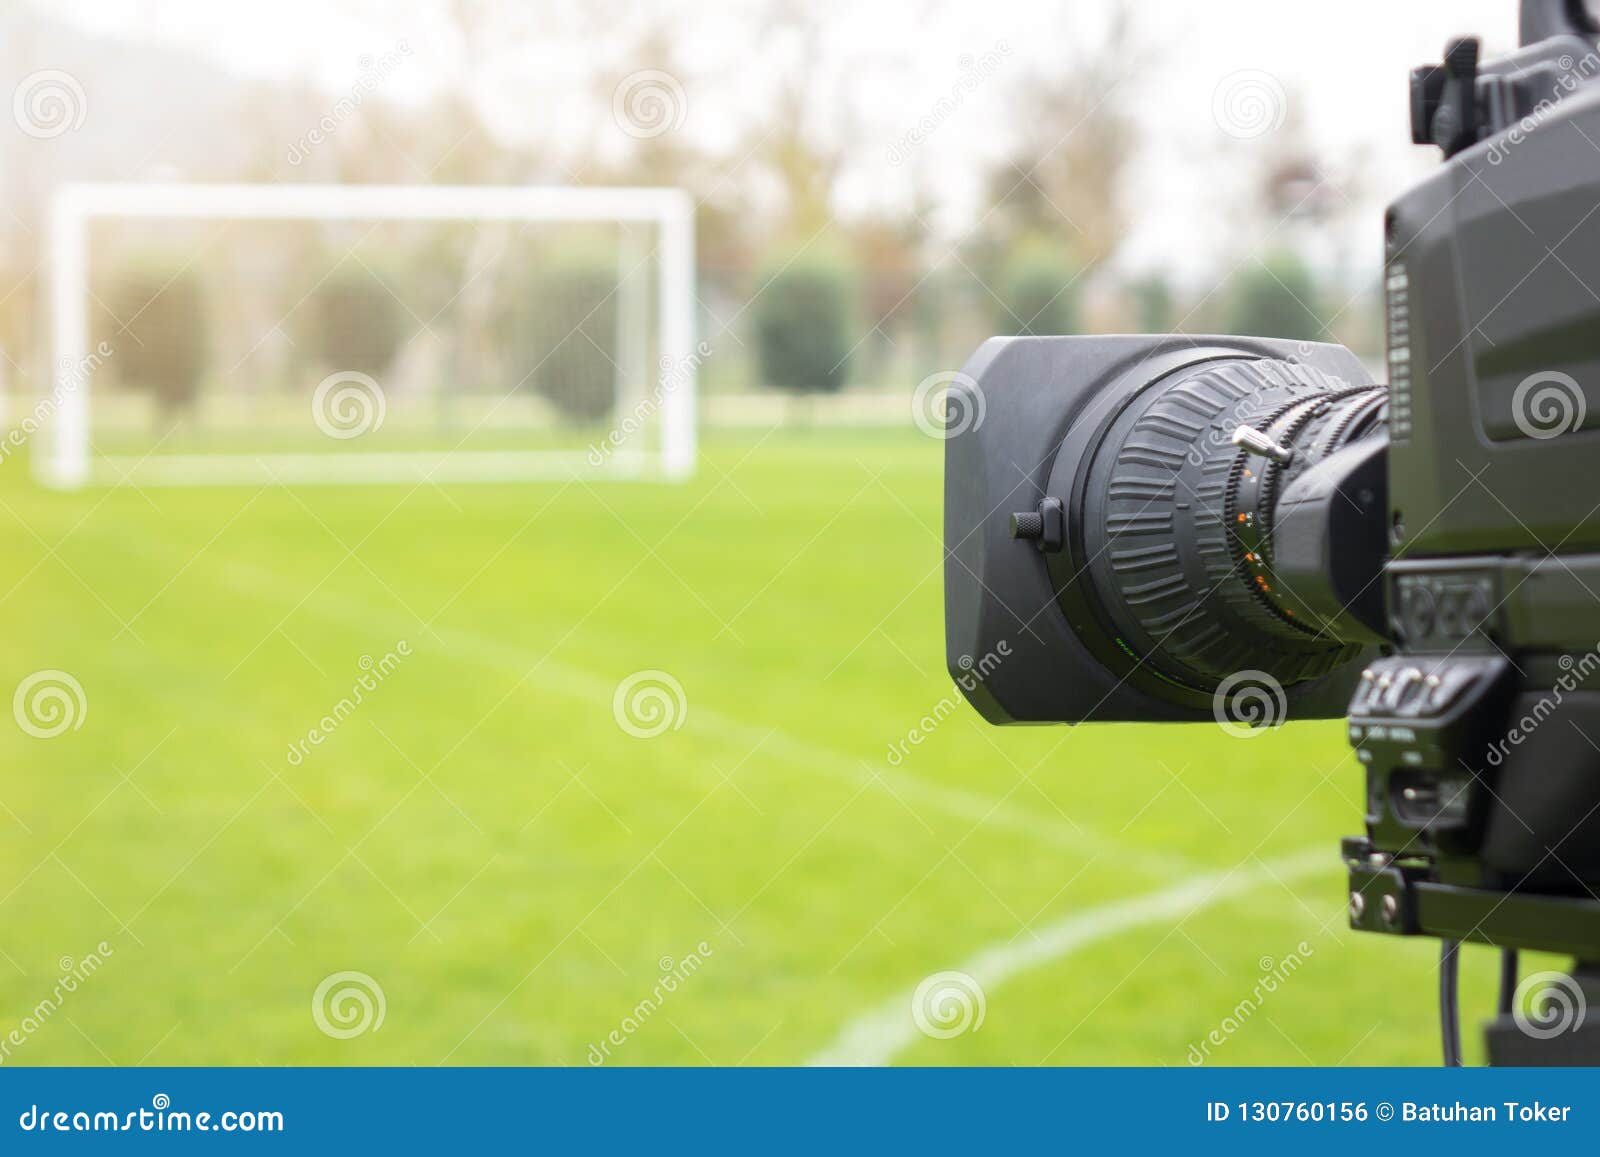 video camera put on the back of football goal for broadcast on tv sport channel. football program can `t editing in studio